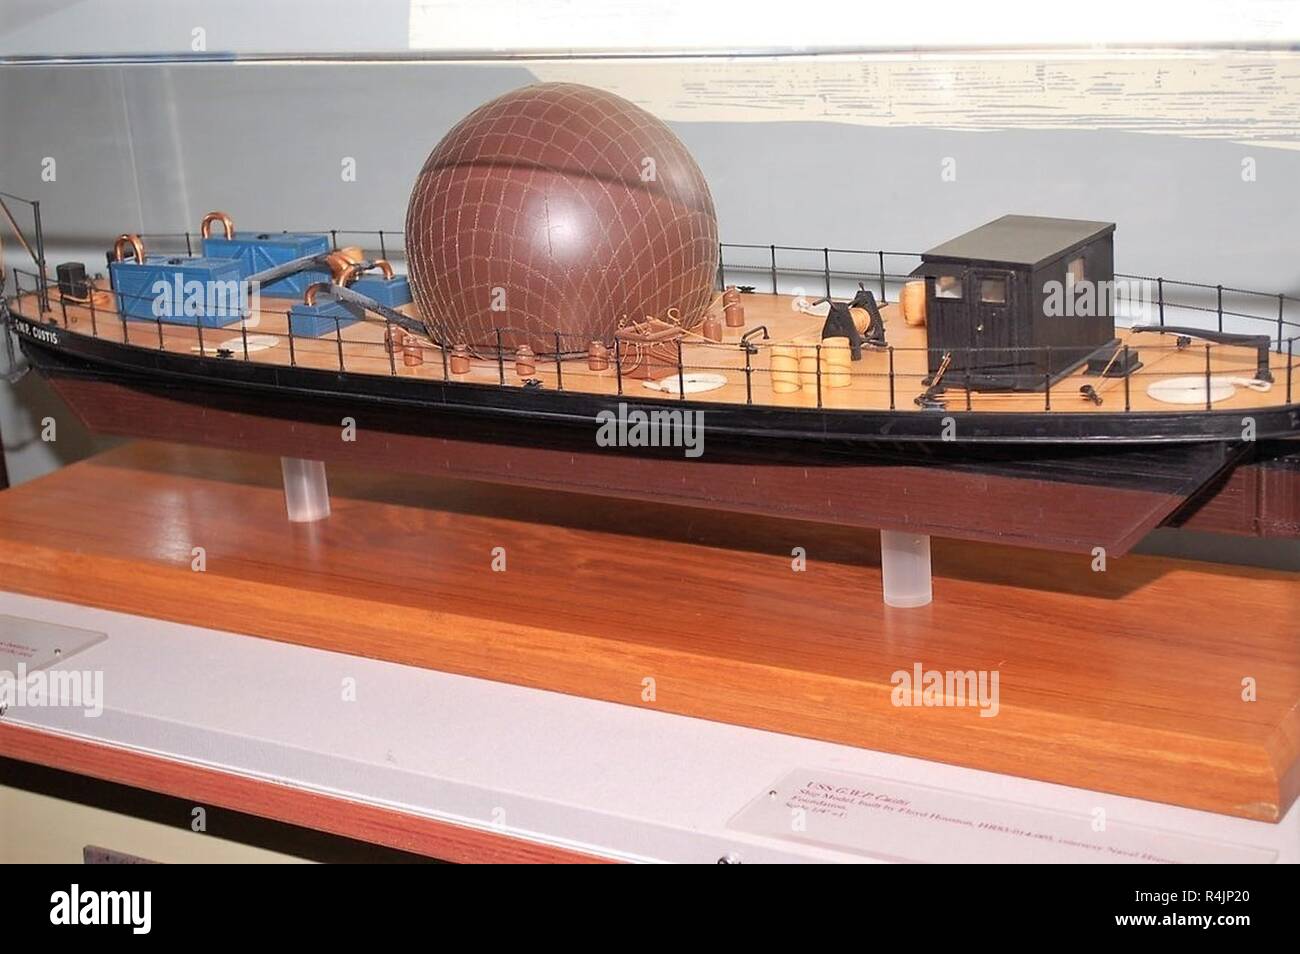 The Hampton Roads Naval Museum contains a detailed model of the USS G.W. Parke Custis. The balloon boat was used by Union forces for the first time on November 11, 1861, when Thaddeus Lowe conducted an aerial observation of Confederate positions from the vessel. This observation paved the way for the US Navy’s present use of air and an element of sea power. The model in the museum’s gallery was built by Floyd Hudson, and was presented to the Truxton-Decatur Museum in 1961. The model was eventually presented to the museum Stock Photo